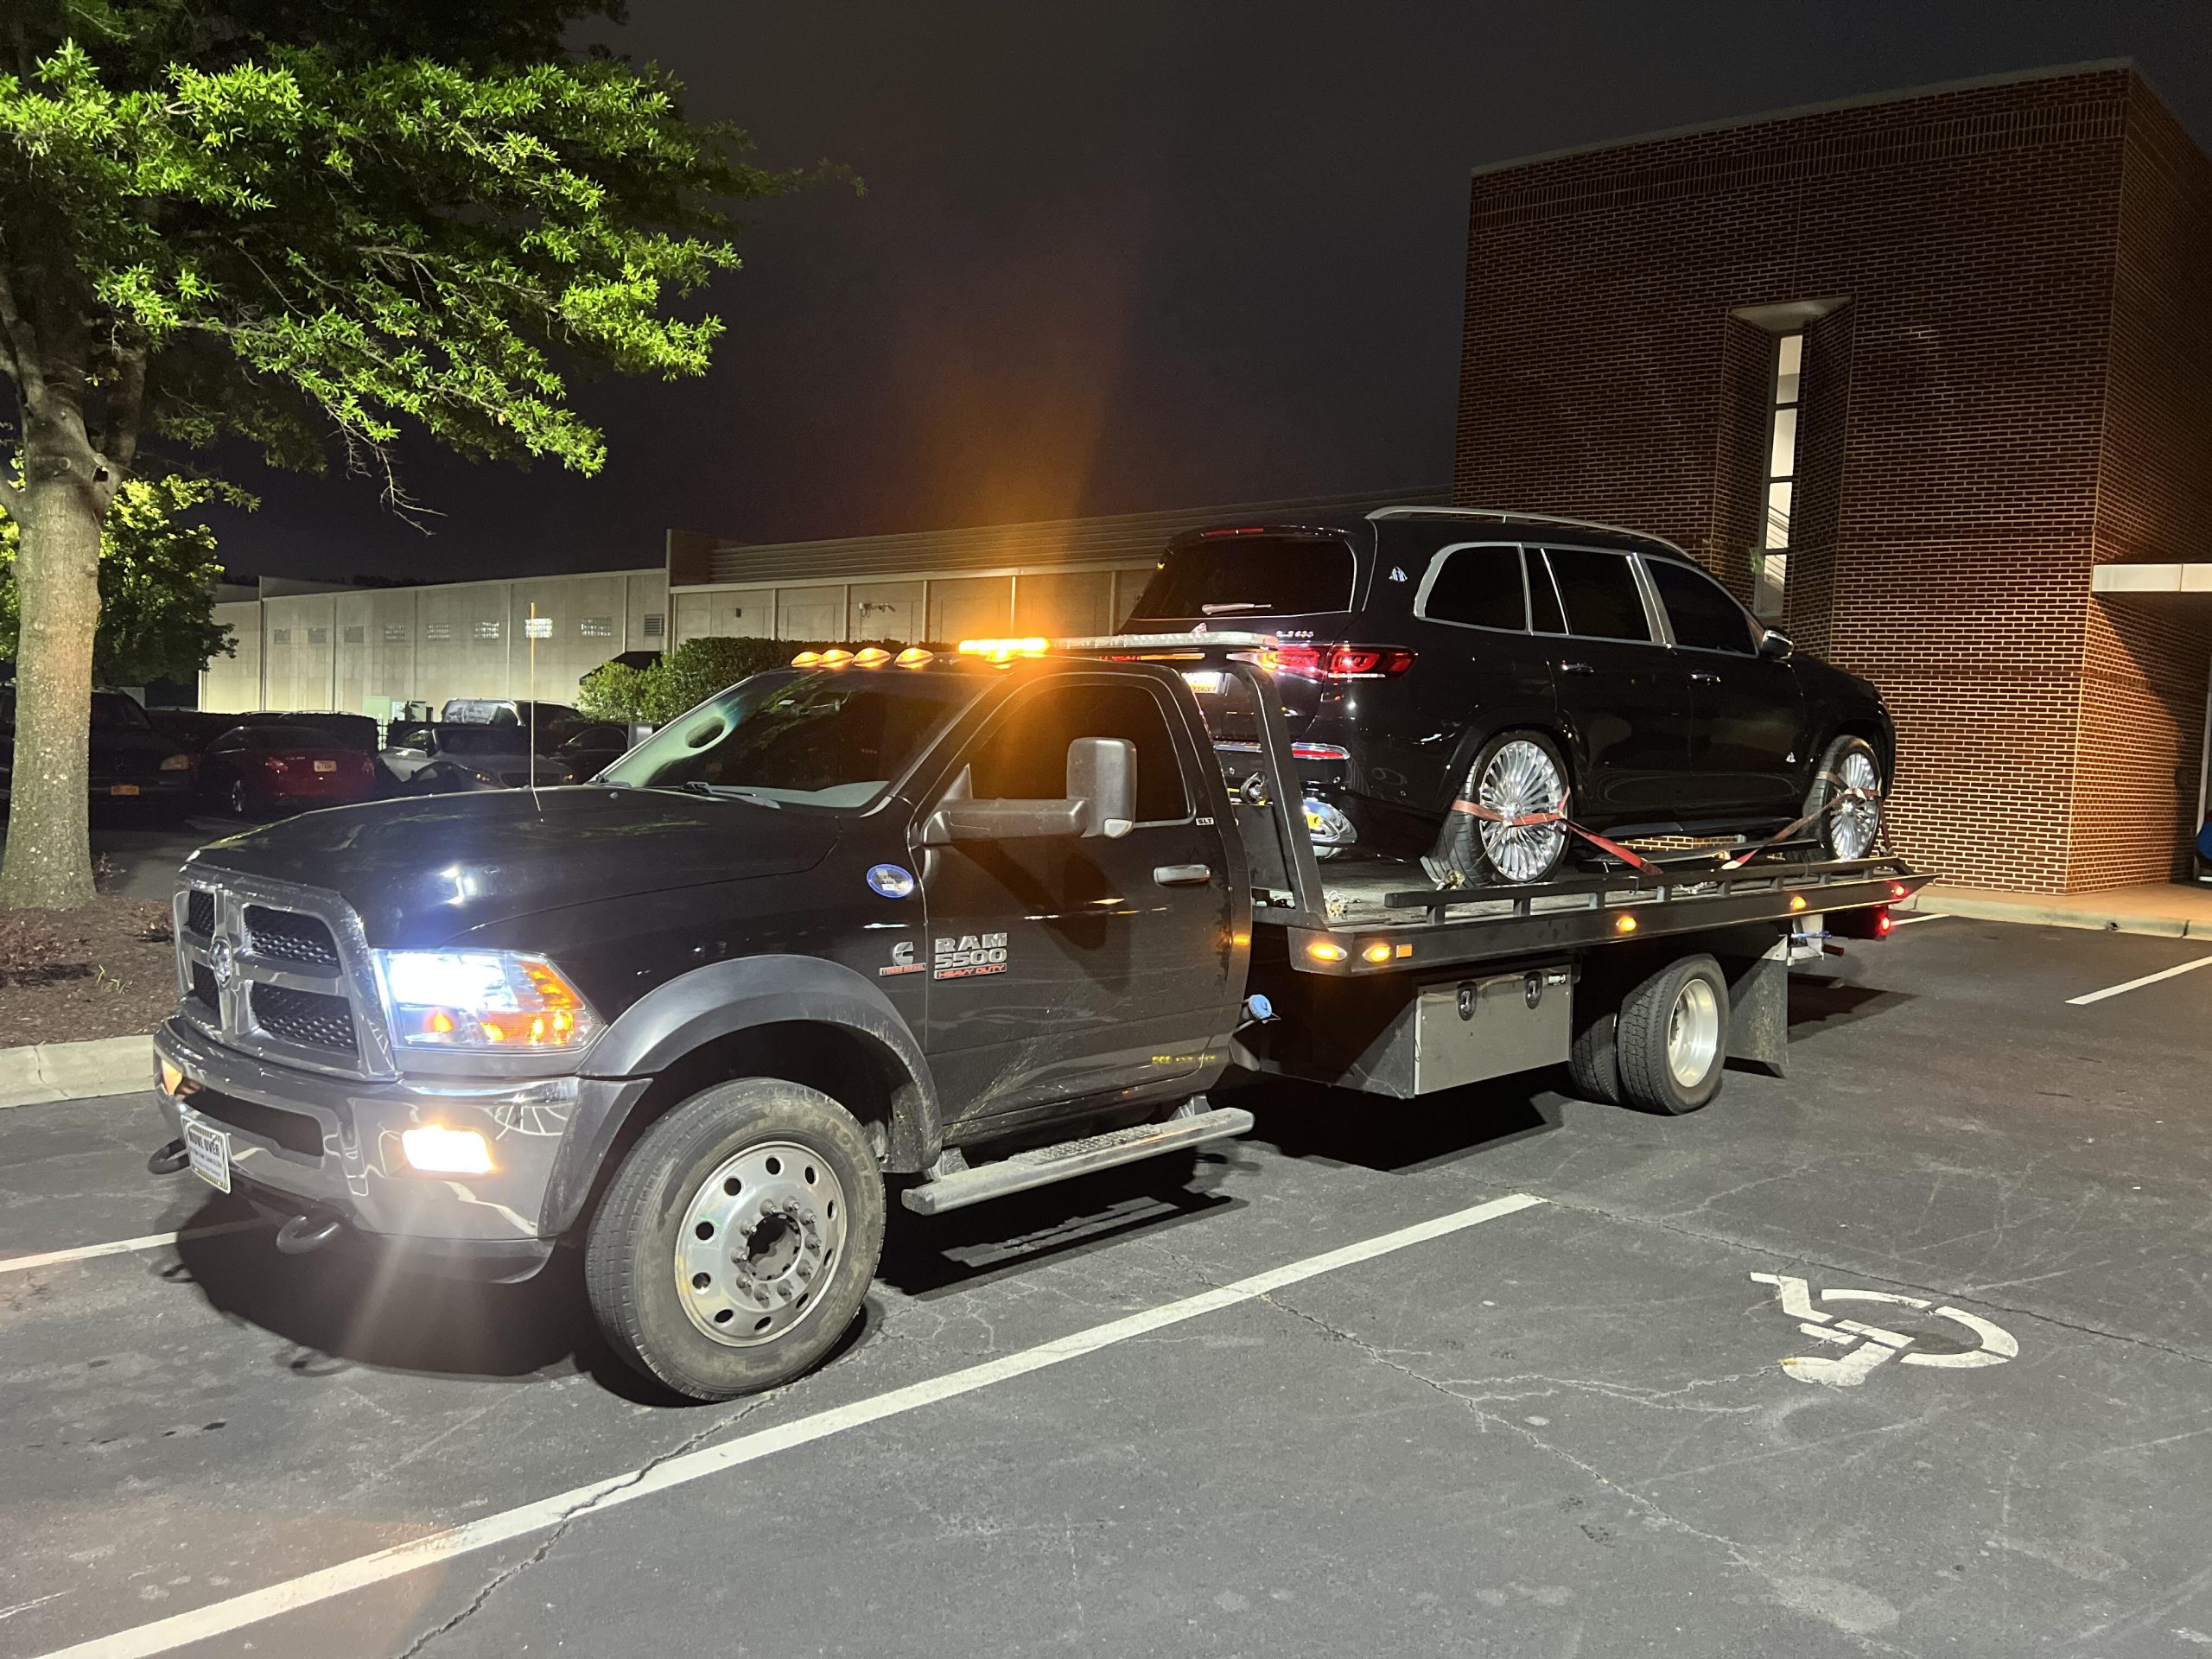 this image shows towing services in Charlotte, NC